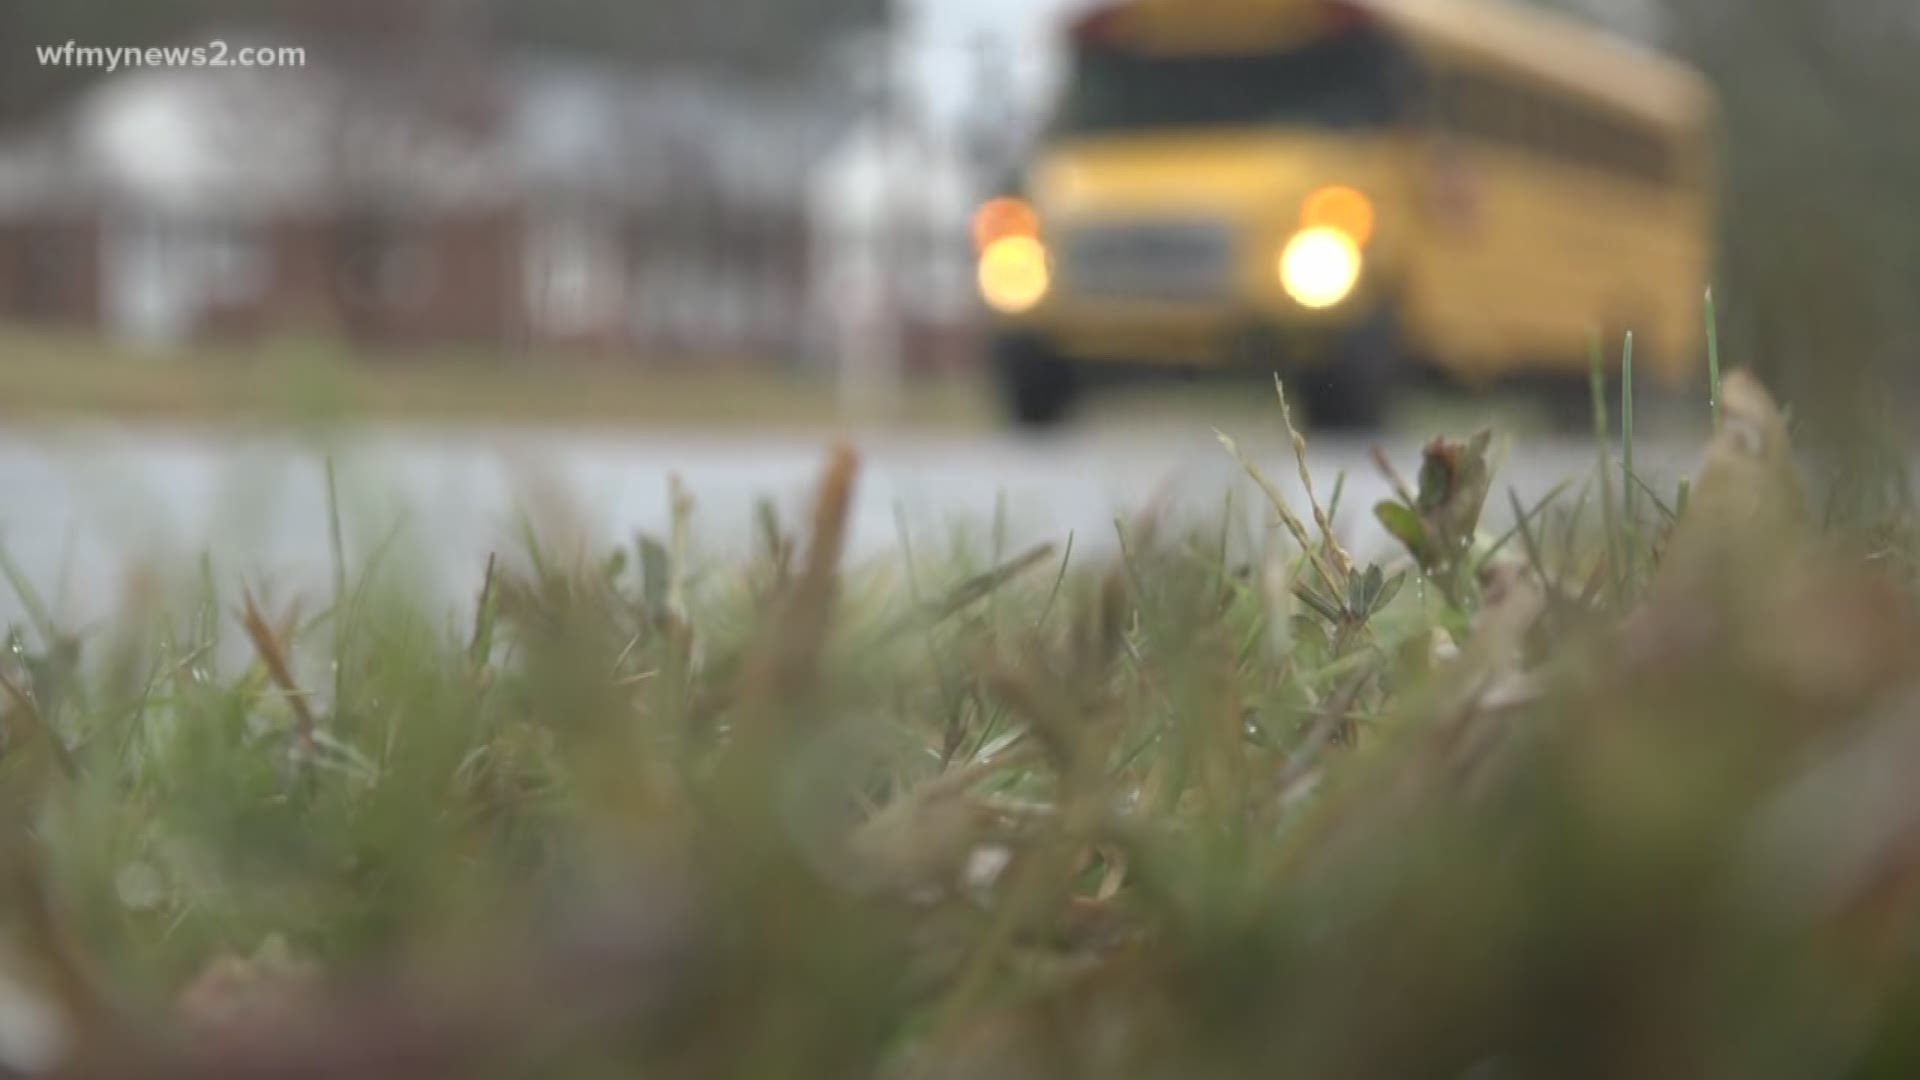 You can see two students sitting on the ground in the overcrowded Guilford County Schools bus.